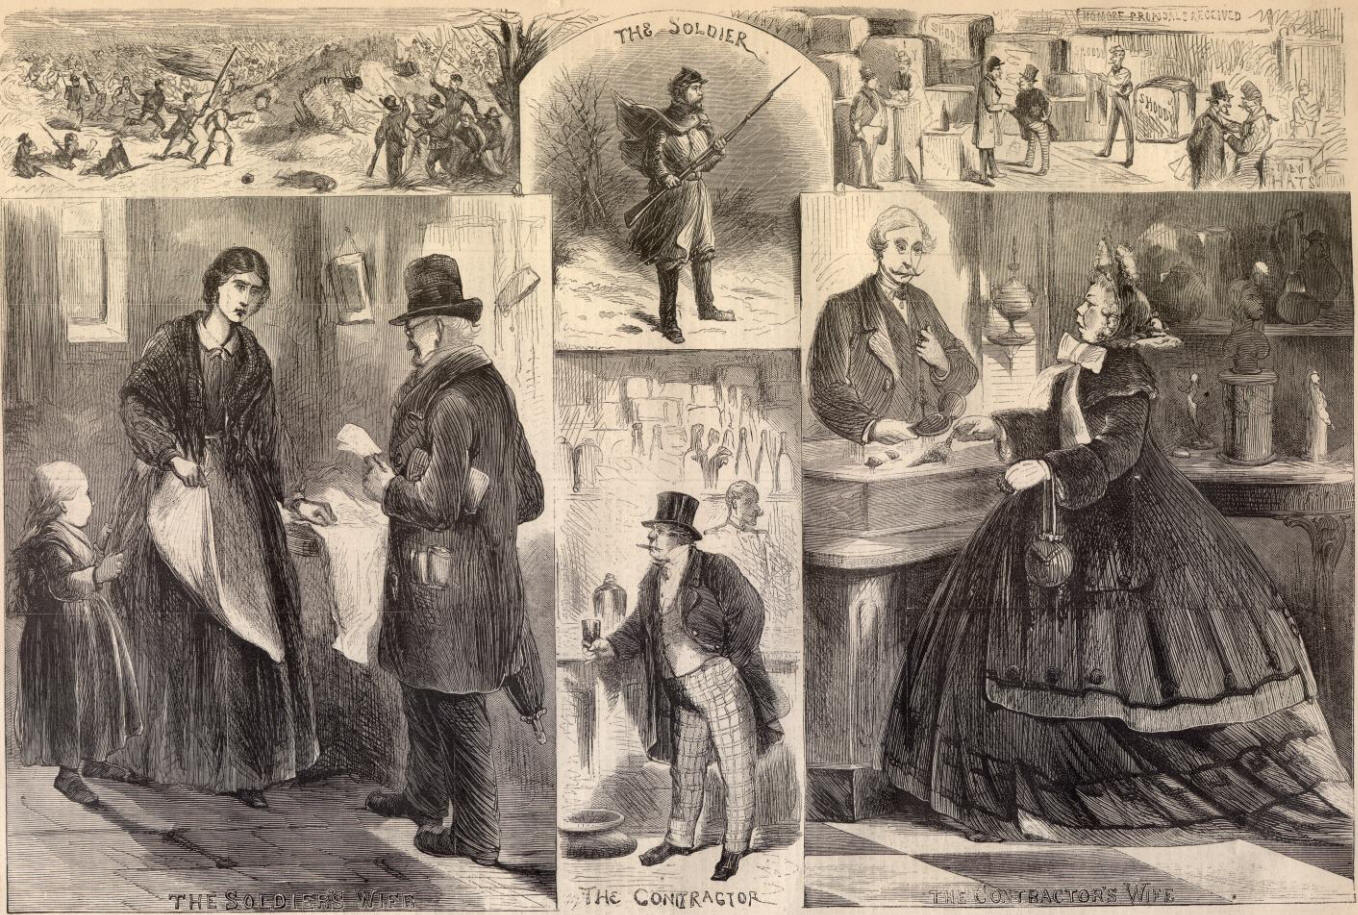 SERVICE AND SHODDY—A PICTURE OF THE TIMES. (Harper's Weekly, October 24, 1863; http://www.sonofthesouth.net/leefoundation/civil-war/1863/october/contractor.htm)